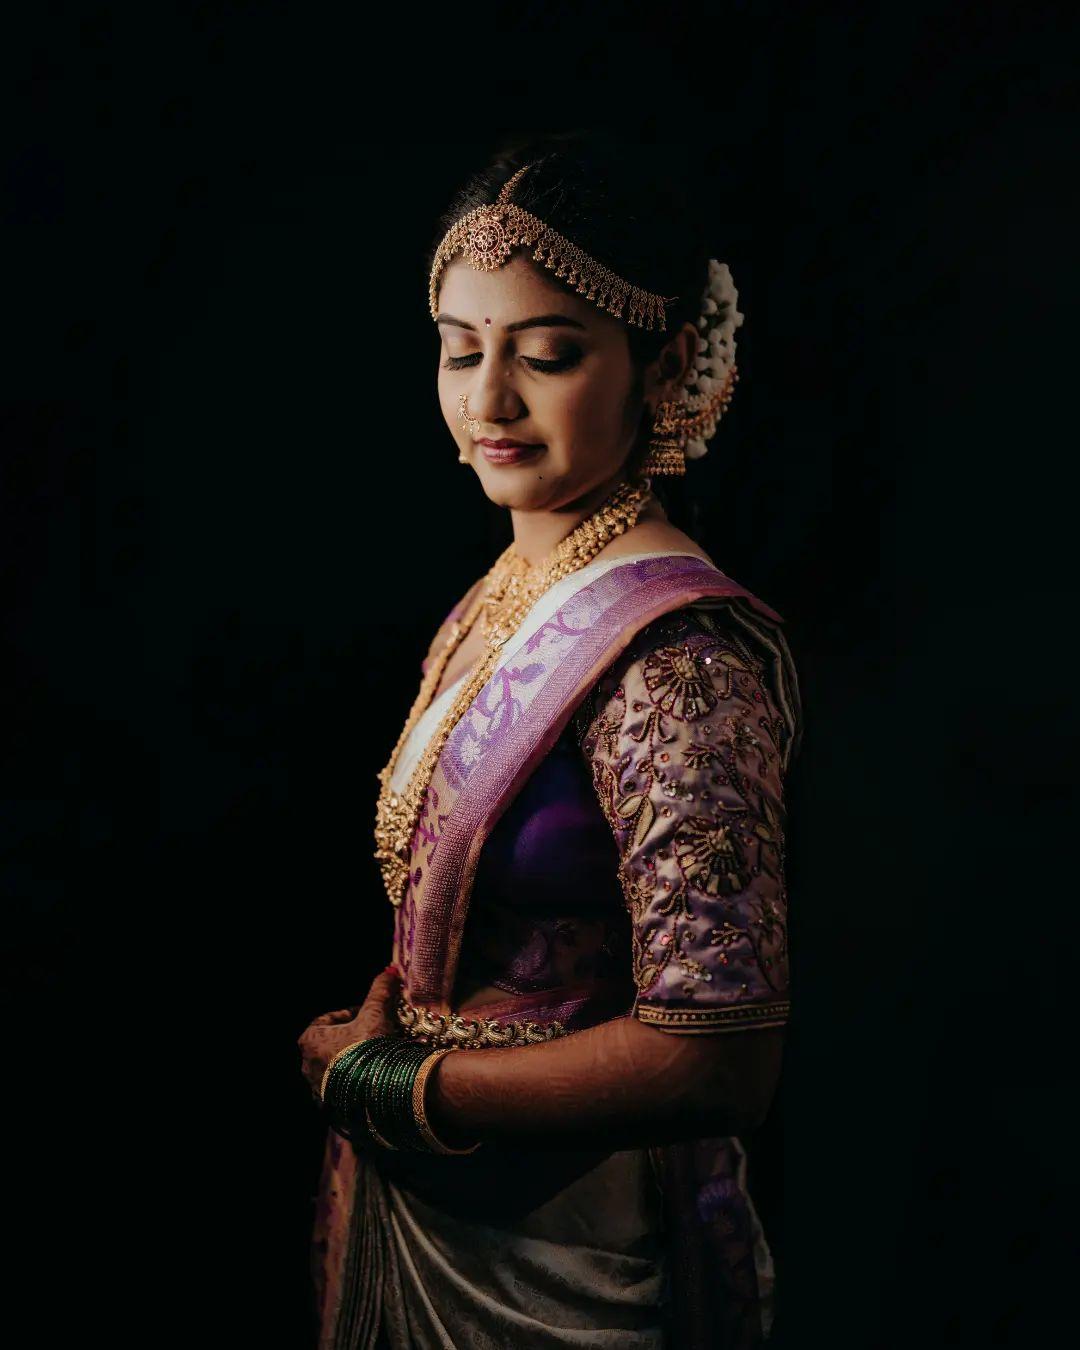 Traditionals❤ | Girly photography, Saree poses, Portrait poses